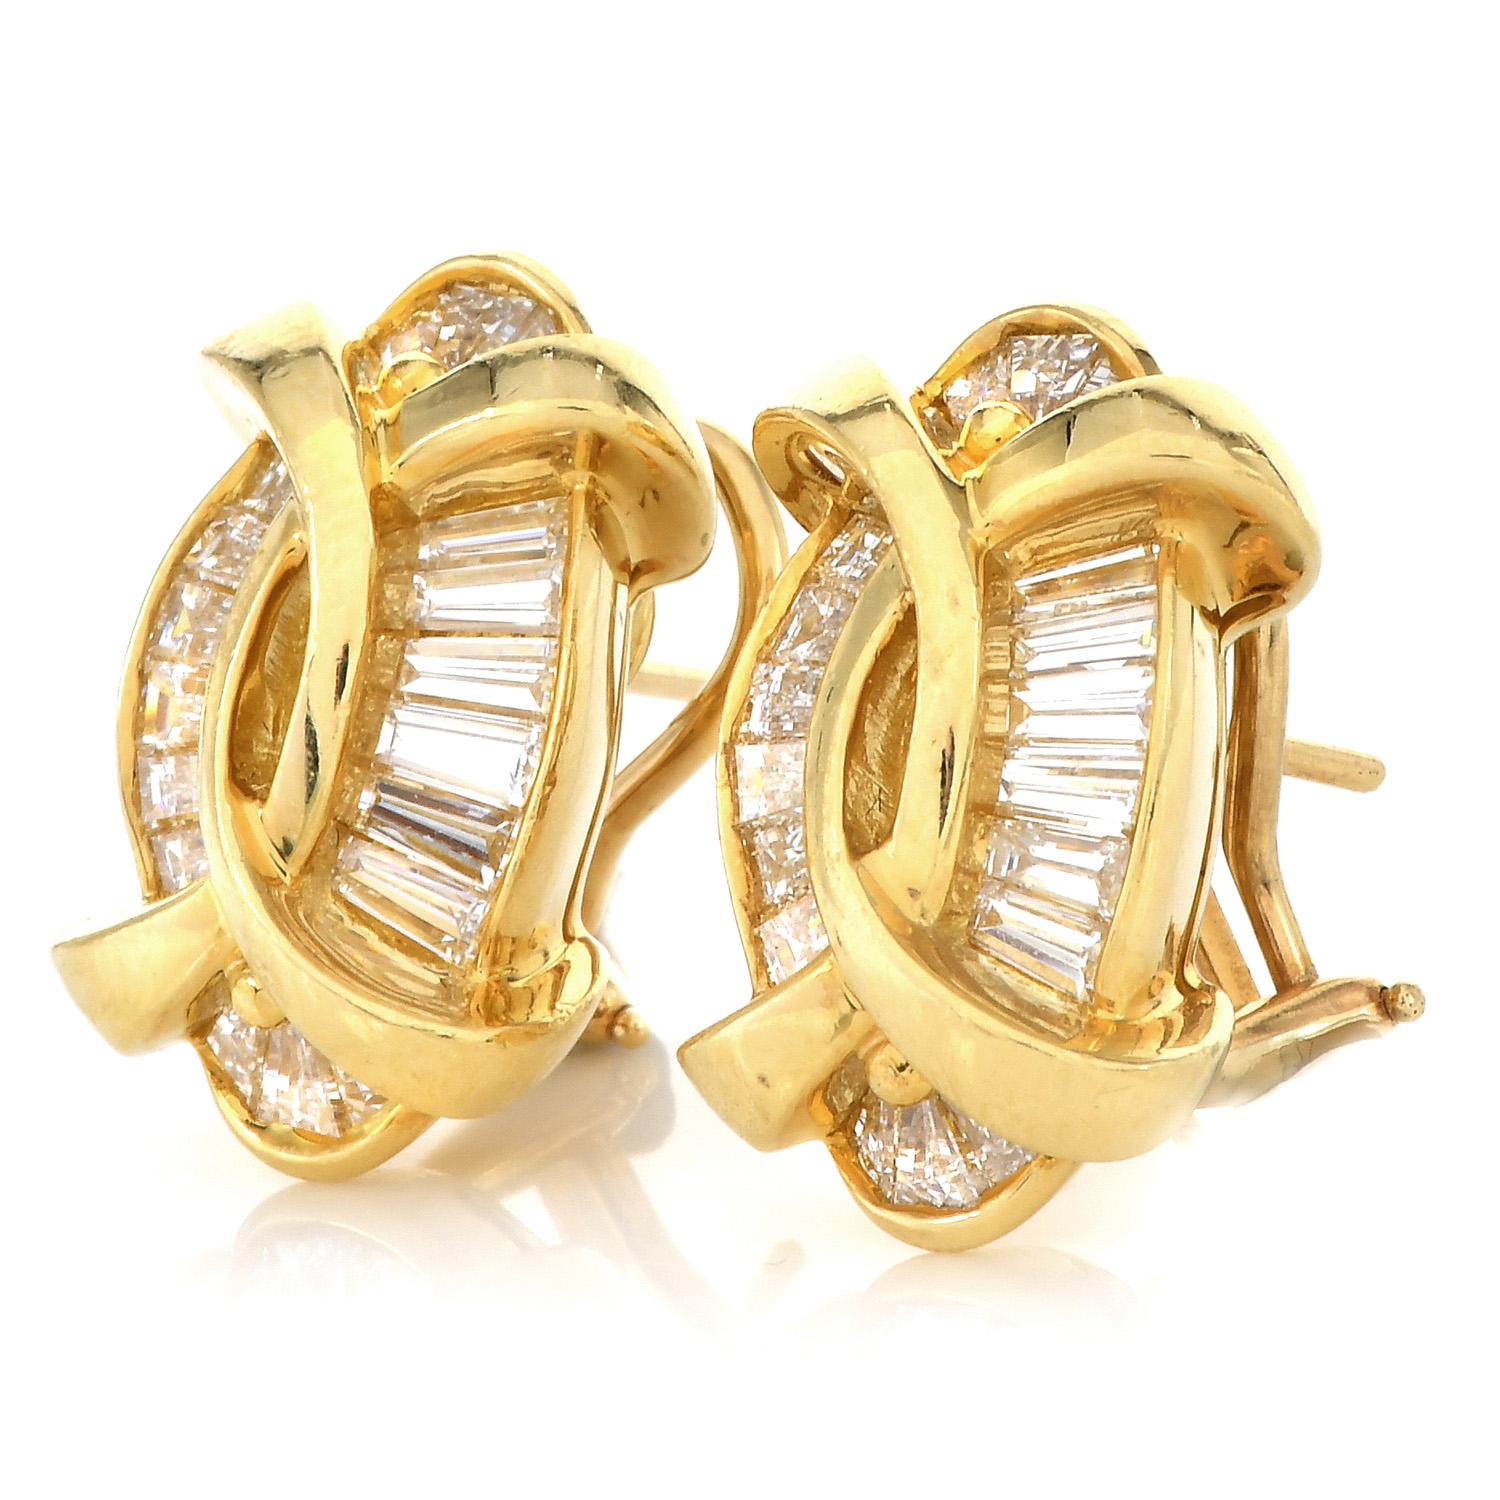 These Exquisite Kurt Wayne earrings are the perfect adjectives to describe thises pieces and their wearer. 

These Kurt Wayne 1980's Earrings are crafted in Solid 18K Yellow Gold,

weigh 18.5 grams and measure 21 mm x 13 mm.

They are perfectly